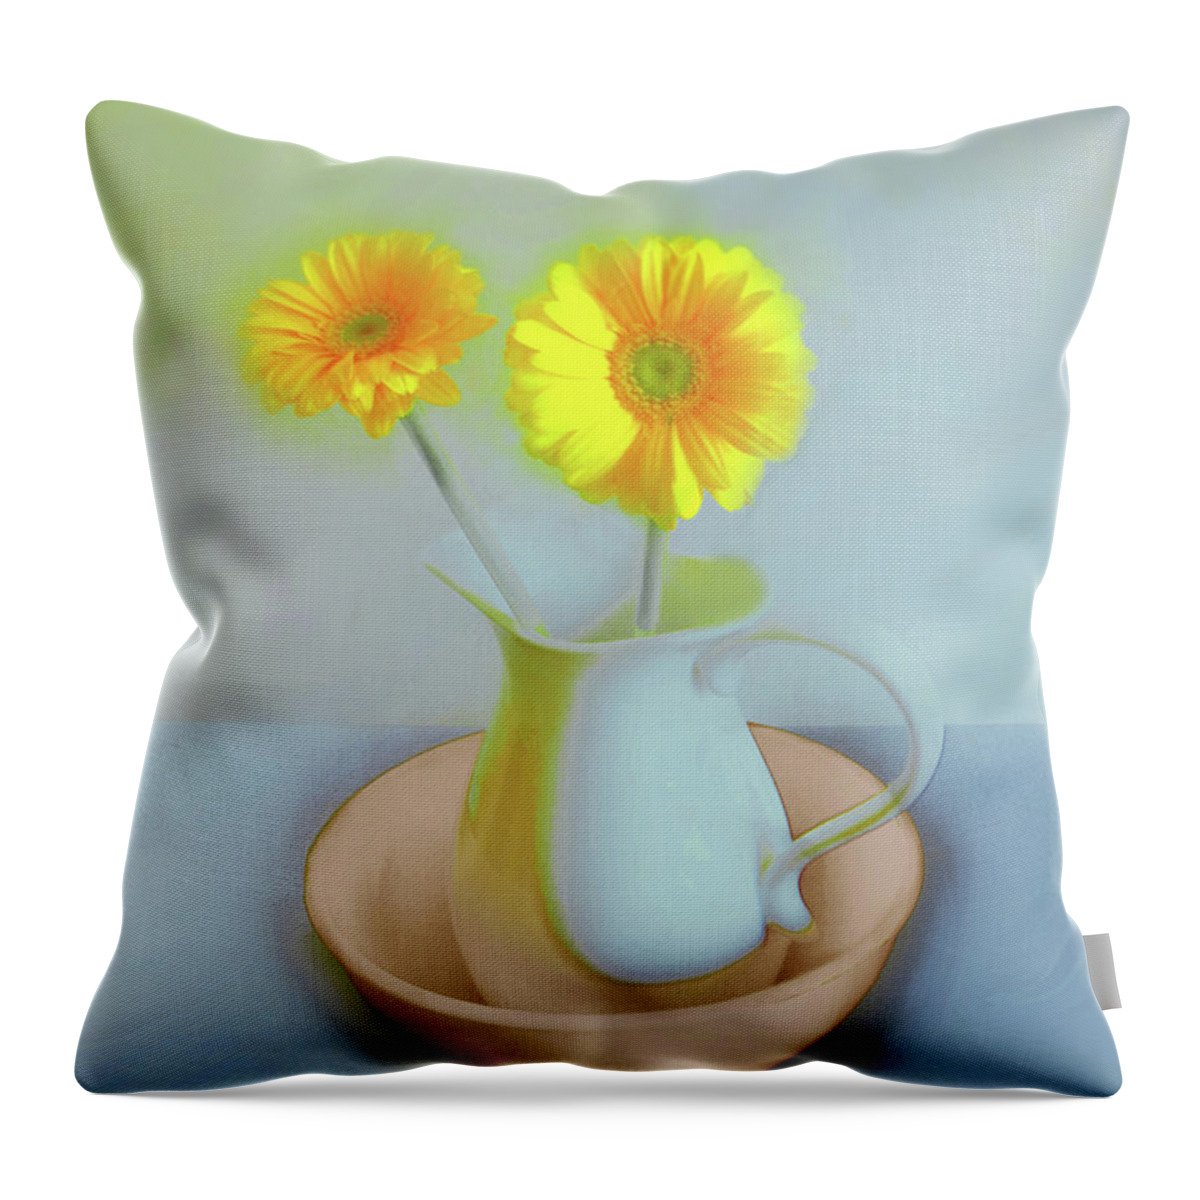 Abstract Art Throw Pillow featuring the digital art Abstract Floral Art 302 by Miss Pet Sitter